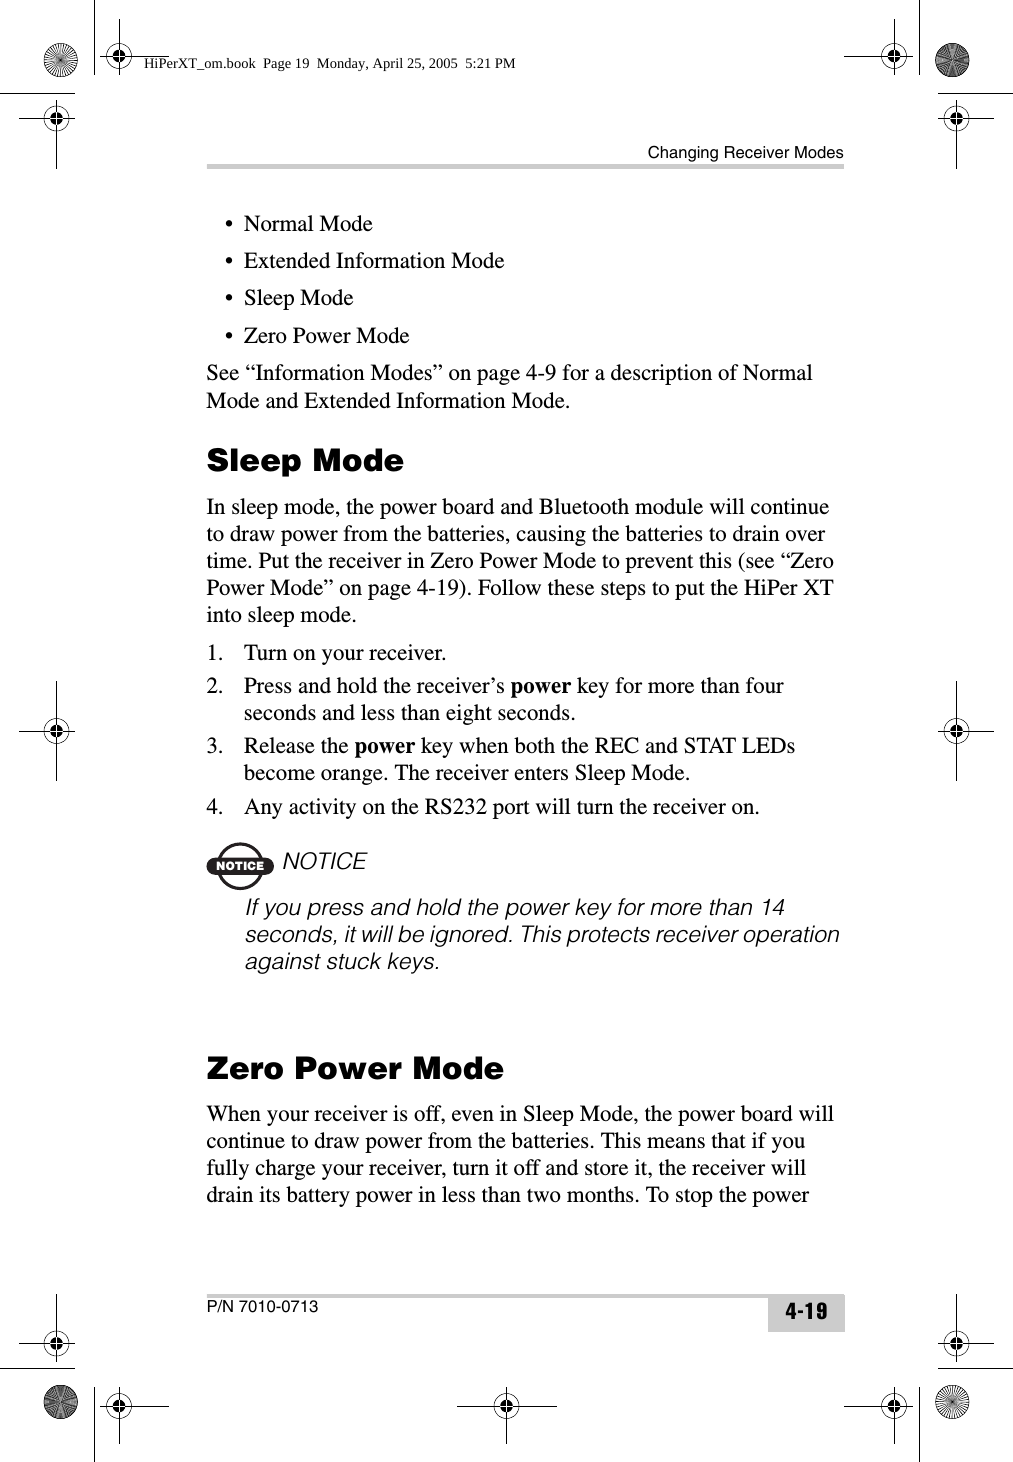 Changing Receiver ModesP/N 7010-0713 4-19• Normal Mode• Extended Information Mode• Sleep Mode•Zero Power ModeSee “Information Modes” on page 4-9 for a description of Normal Mode and Extended Information Mode.Sleep ModeIn sleep mode, the power board and Bluetooth module will continue to draw power from the batteries, causing the batteries to drain over time. Put the receiver in Zero Power Mode to prevent this (see “Zero Power Mode” on page 4-19). Follow these steps to put the HiPer XT into sleep mode.1. Turn on your receiver.2. Press and hold the receiver’s power key for more than four seconds and less than eight seconds.3. Release the power key when both the REC and STAT LEDs become orange. The receiver enters Sleep Mode.4. Any activity on the RS232 port will turn the receiver on.NOTICENOTICEIf you press and hold the power key for more than 14 seconds, it will be ignored. This protects receiver operation against stuck keys.Zero Power ModeWhen your receiver is off, even in Sleep Mode, the power board will continue to draw power from the batteries. This means that if you fully charge your receiver, turn it off and store it, the receiver will drain its battery power in less than two months. To stop the power HiPerXT_om.book  Page 19  Monday, April 25, 2005  5:21 PM